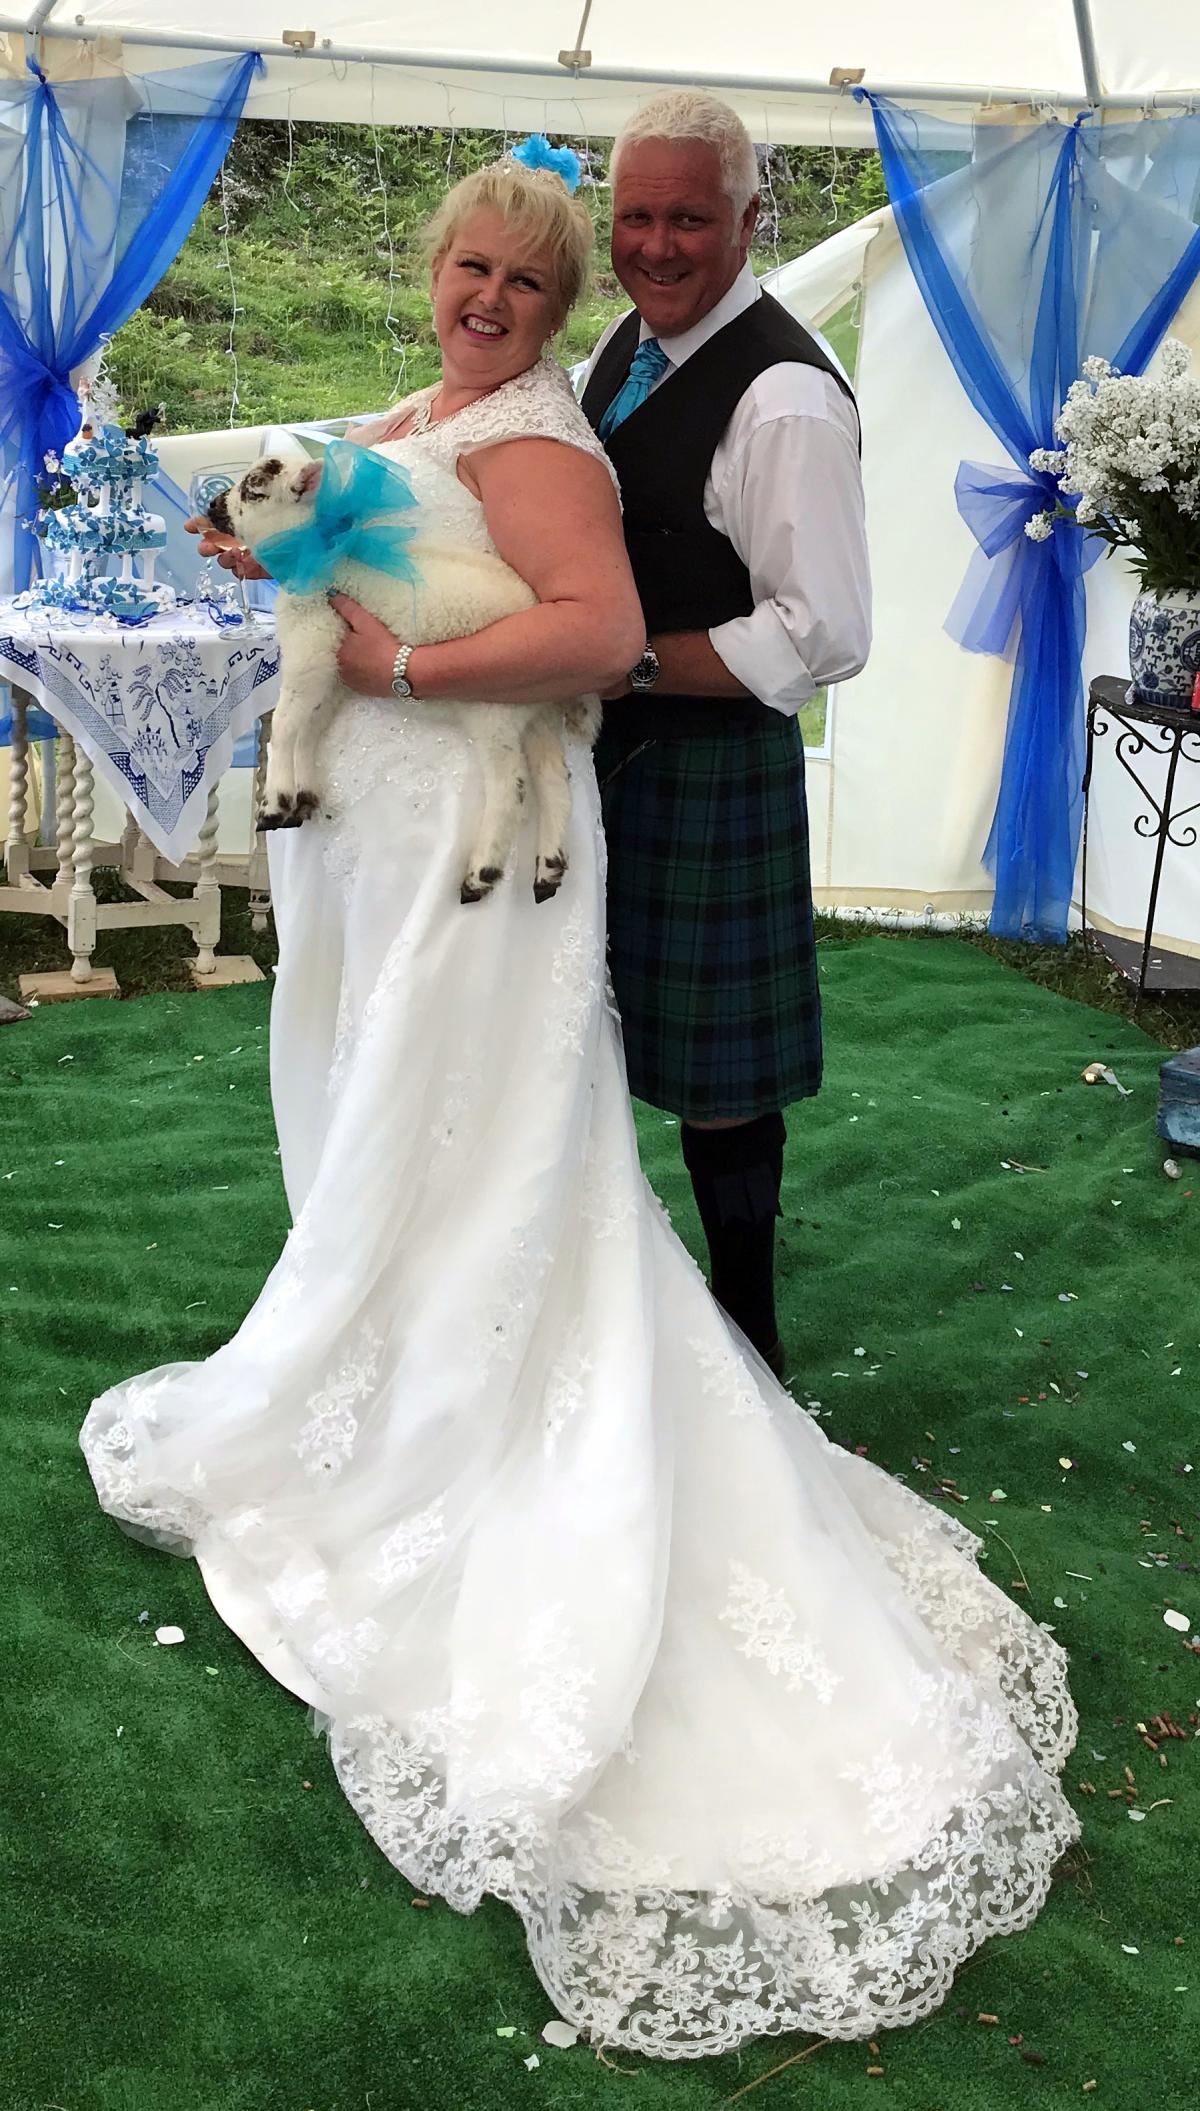 Wedded recently on Islay were Mairi Porter and John McCallum, both of Bluebell Cottage, Port Askaig, with the reception in a marquee in the garden   Picture: Jessica May Fletcher